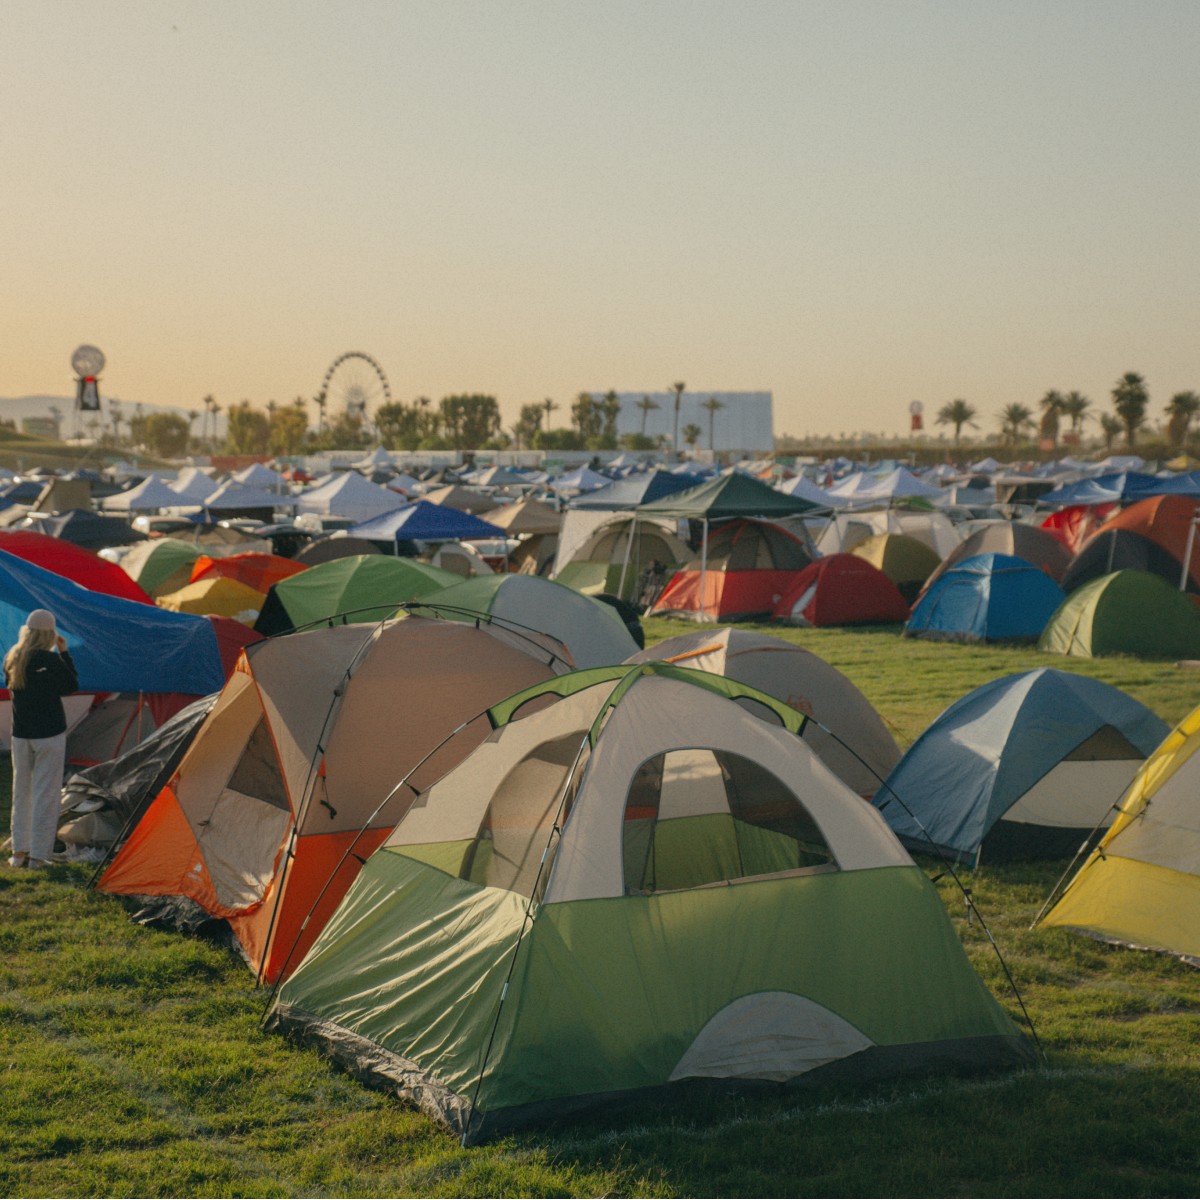 Tents on lawn in campgrounds